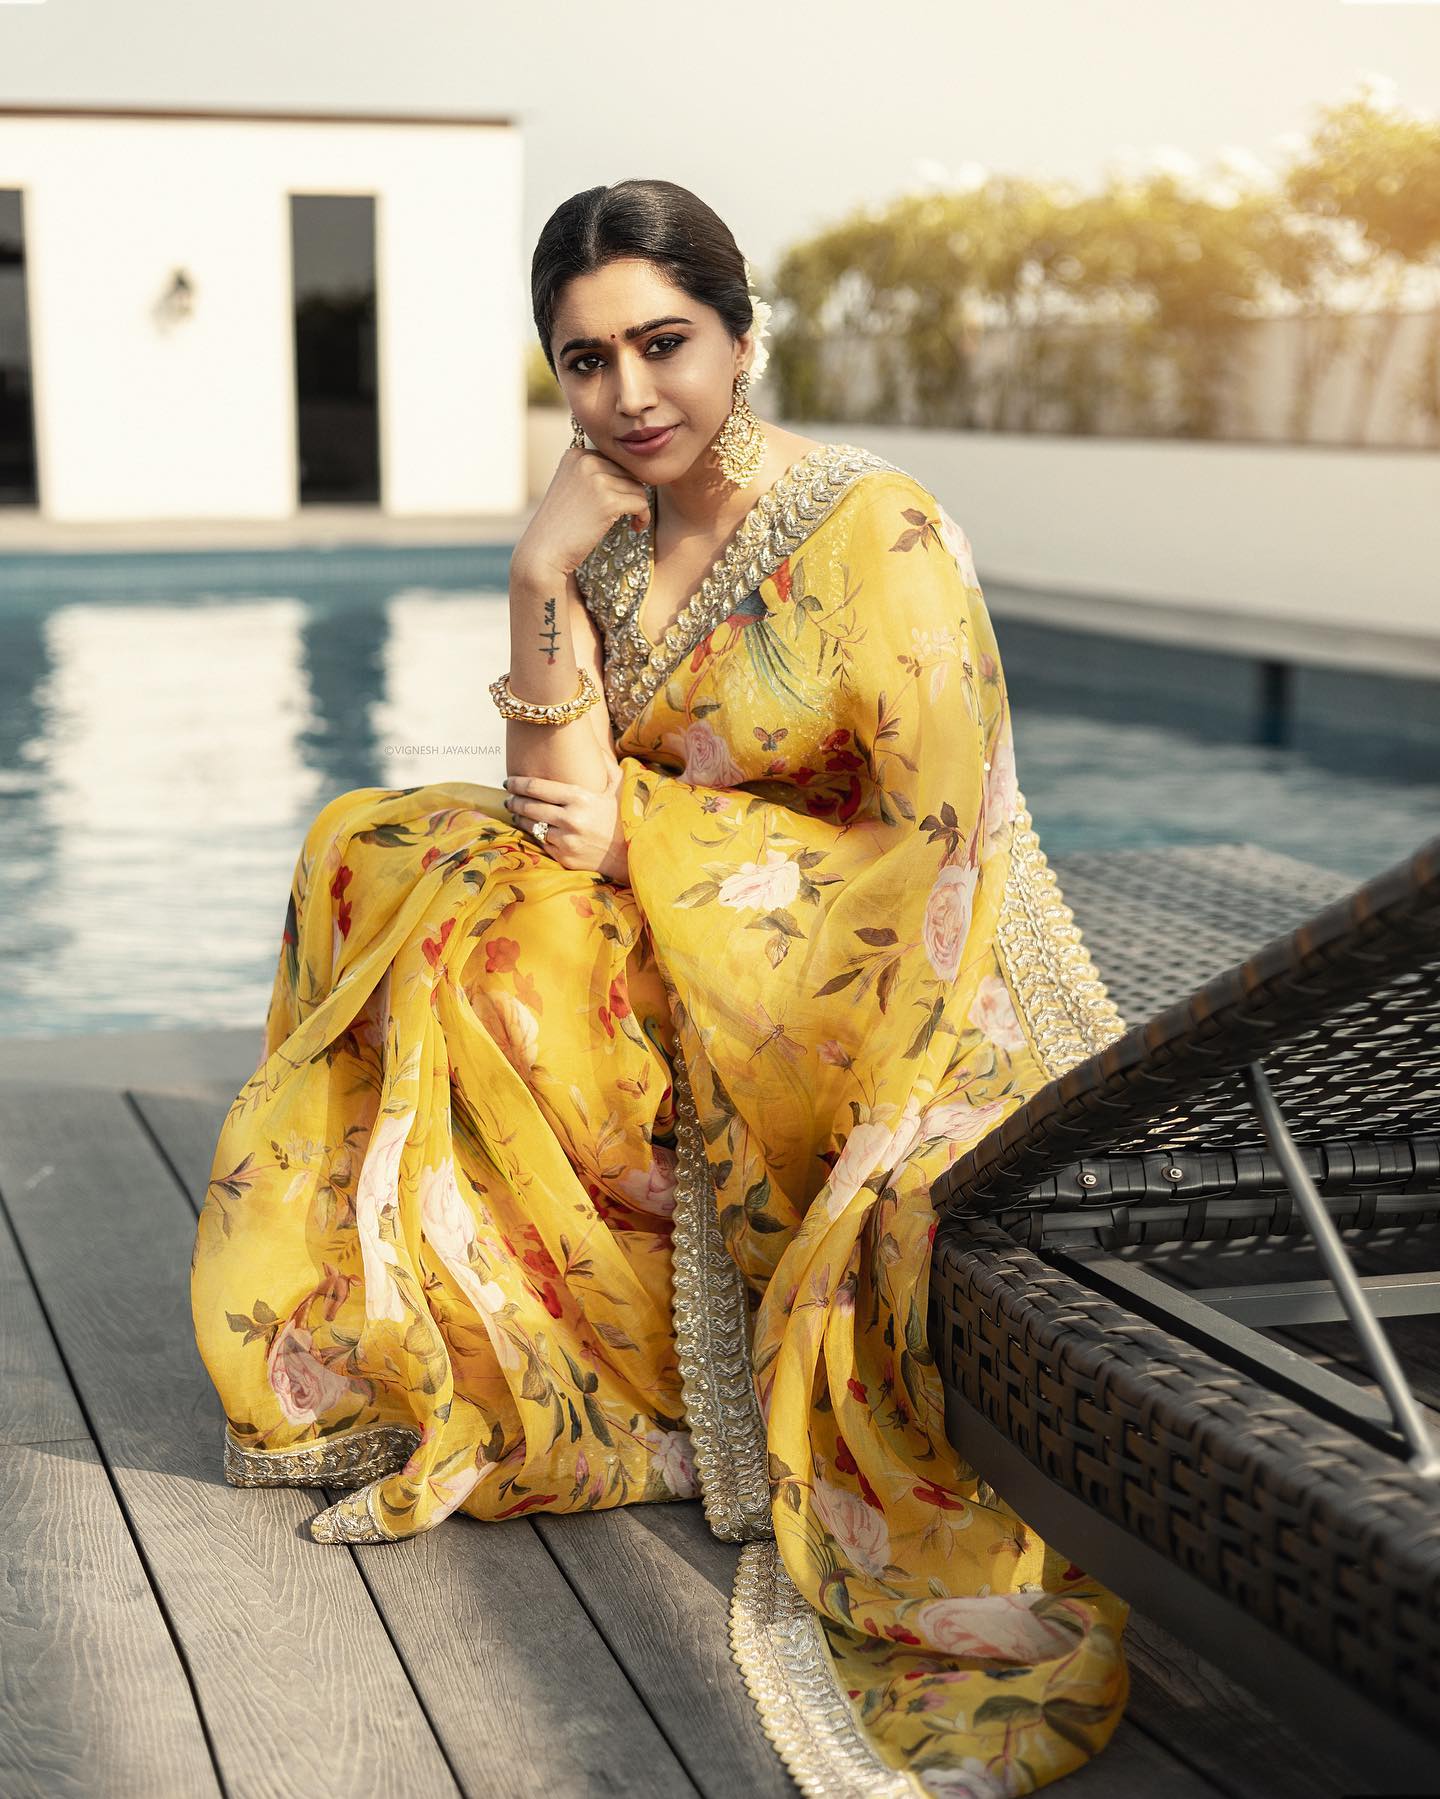 yellow floral printed saree for haldi ceremony for bride